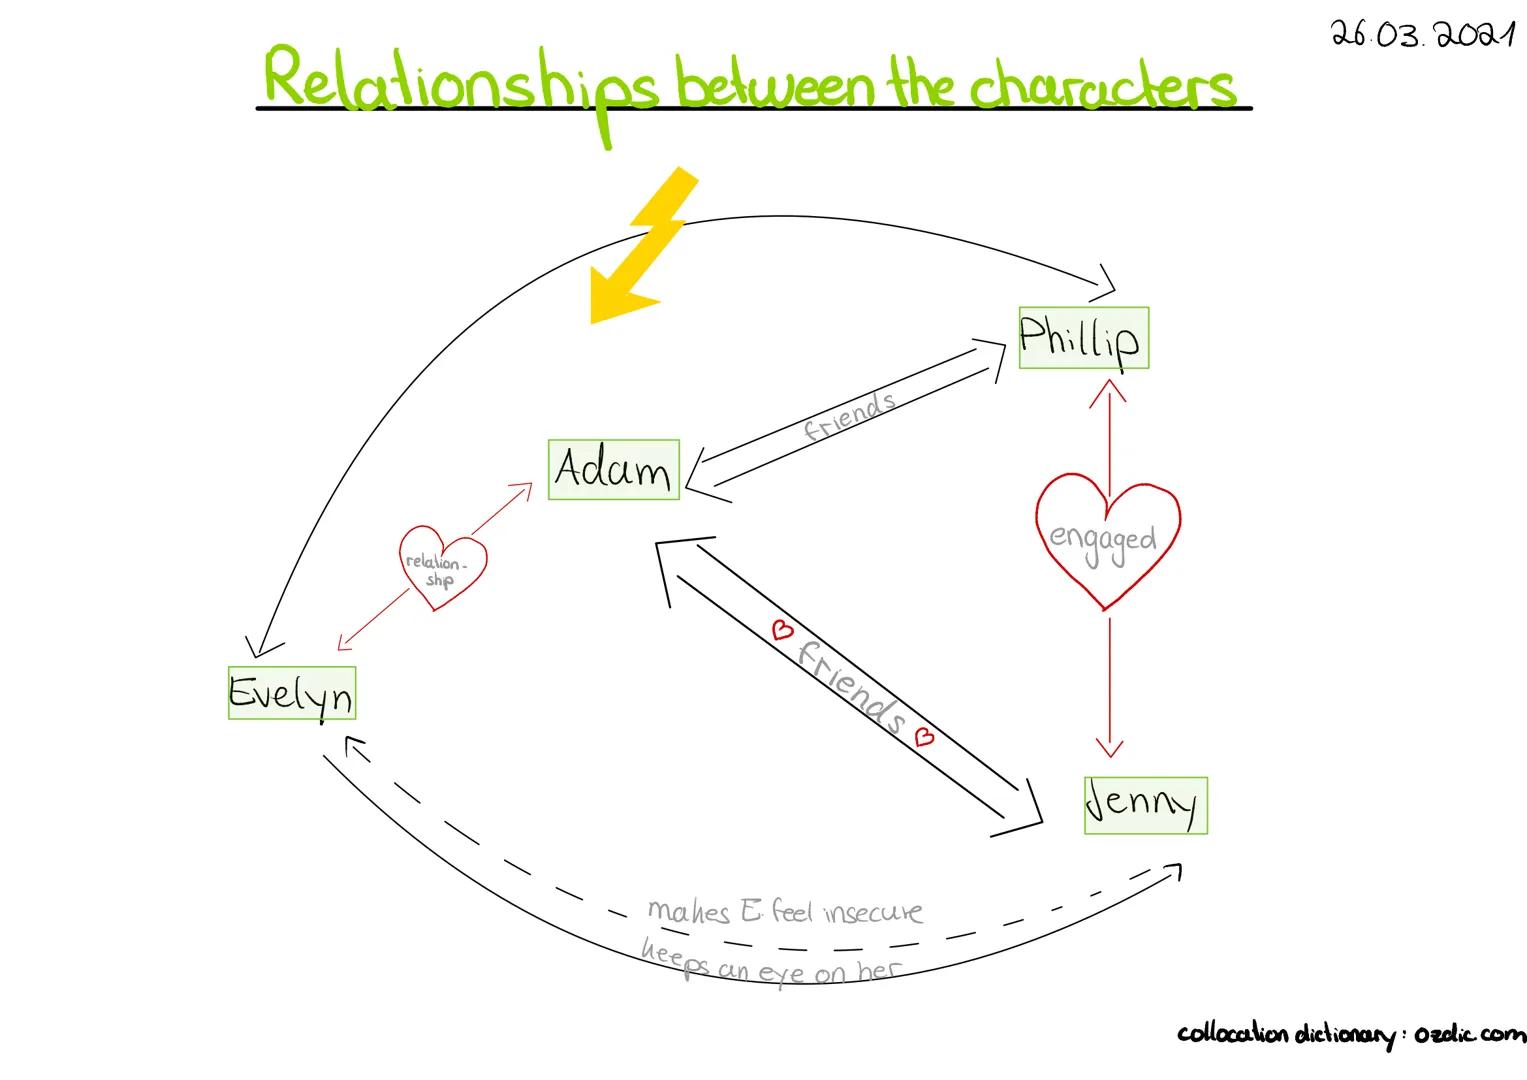 Relationships between the characters.
Evelyn
relation-
ship
Adam
friends
♡ friends ♡
mahes E feel insecure
keeps an eye on her
Phillip
engag